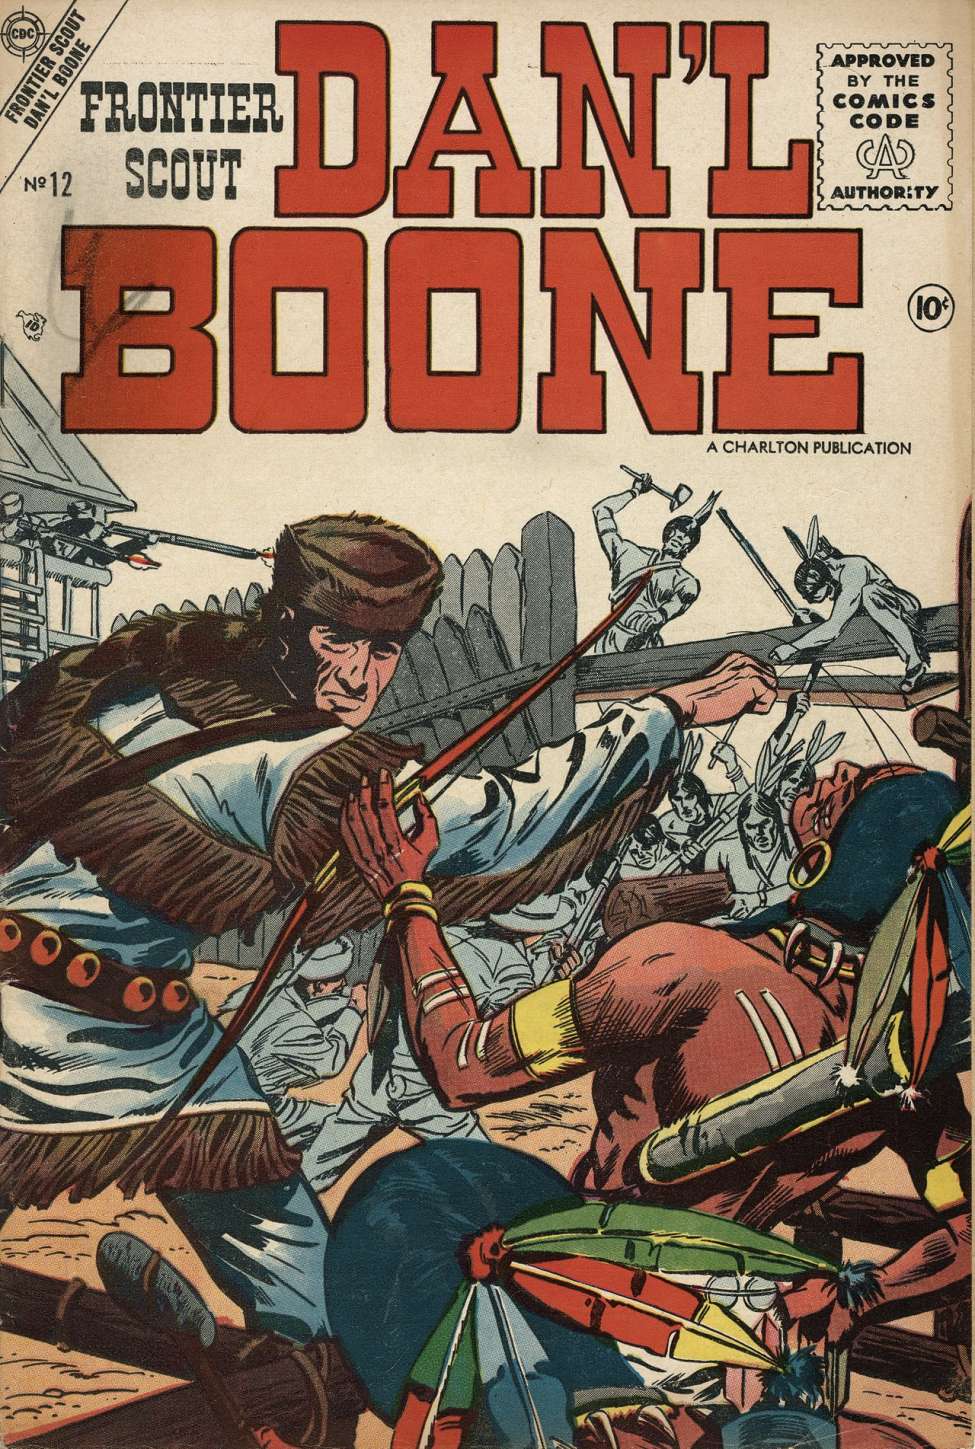 Comic Book Cover For Frontier Scout, Dan'l Boone 12